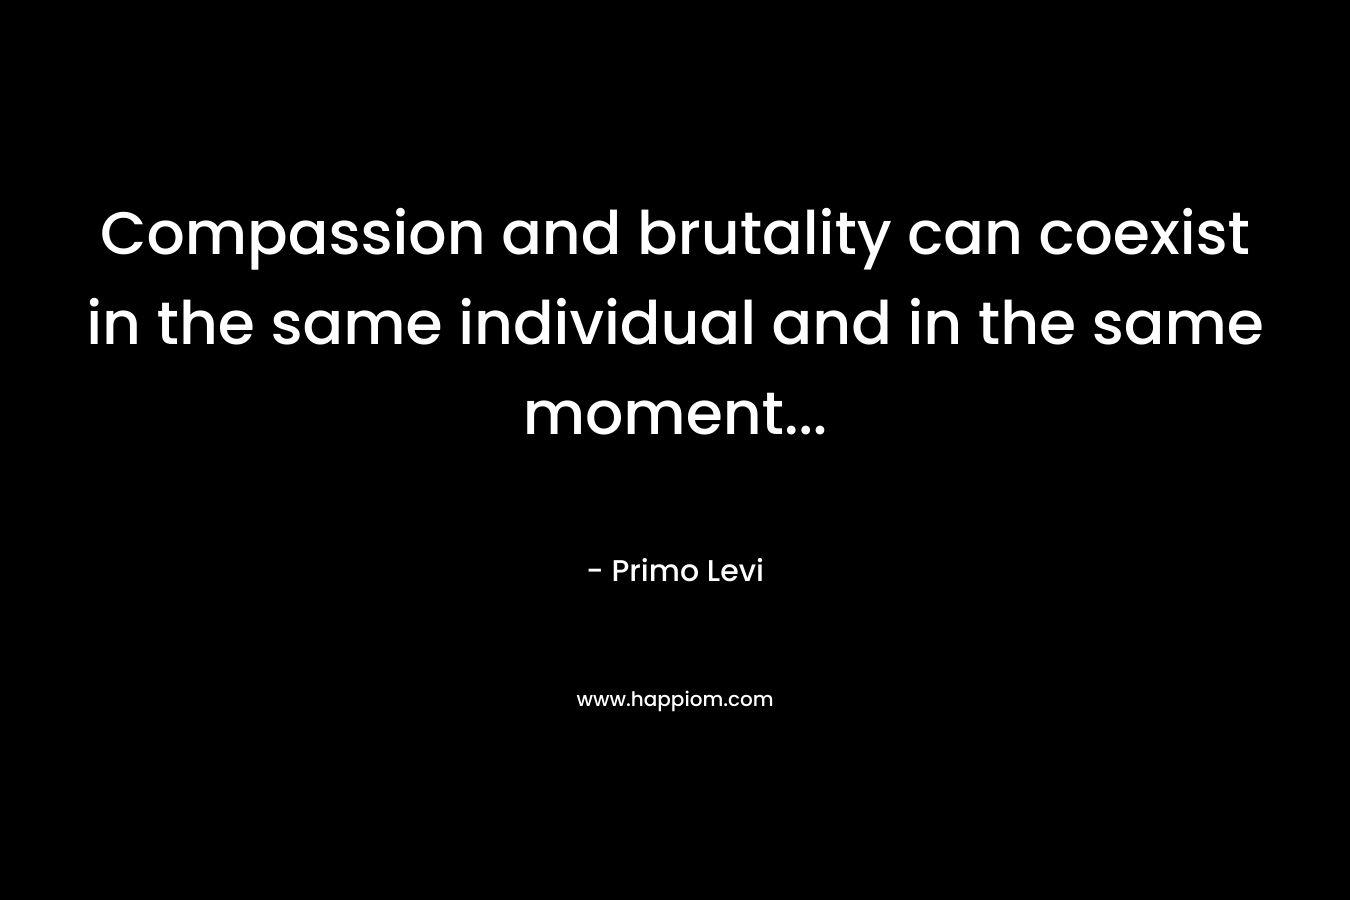 Compassion and brutality can coexist in the same individual and in the same moment...